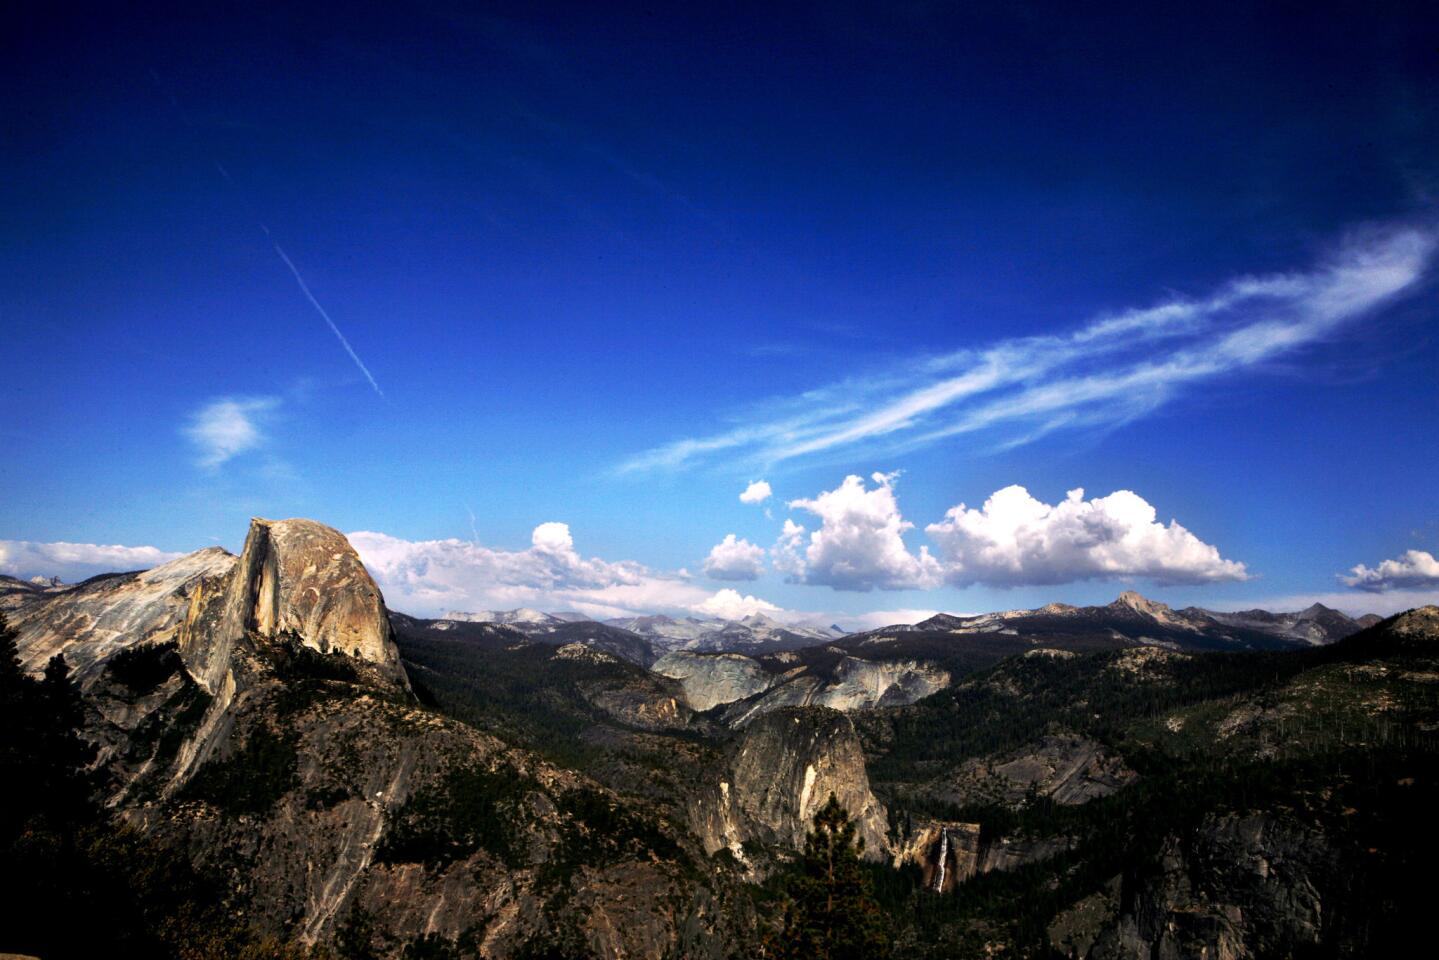 With its waterfalls, meadows, peaks and well-known granite crest Half Dome, Yosemite is one of the most famous national parks in the U.S., making the Northern California landmark an obvious OS X name candidate.